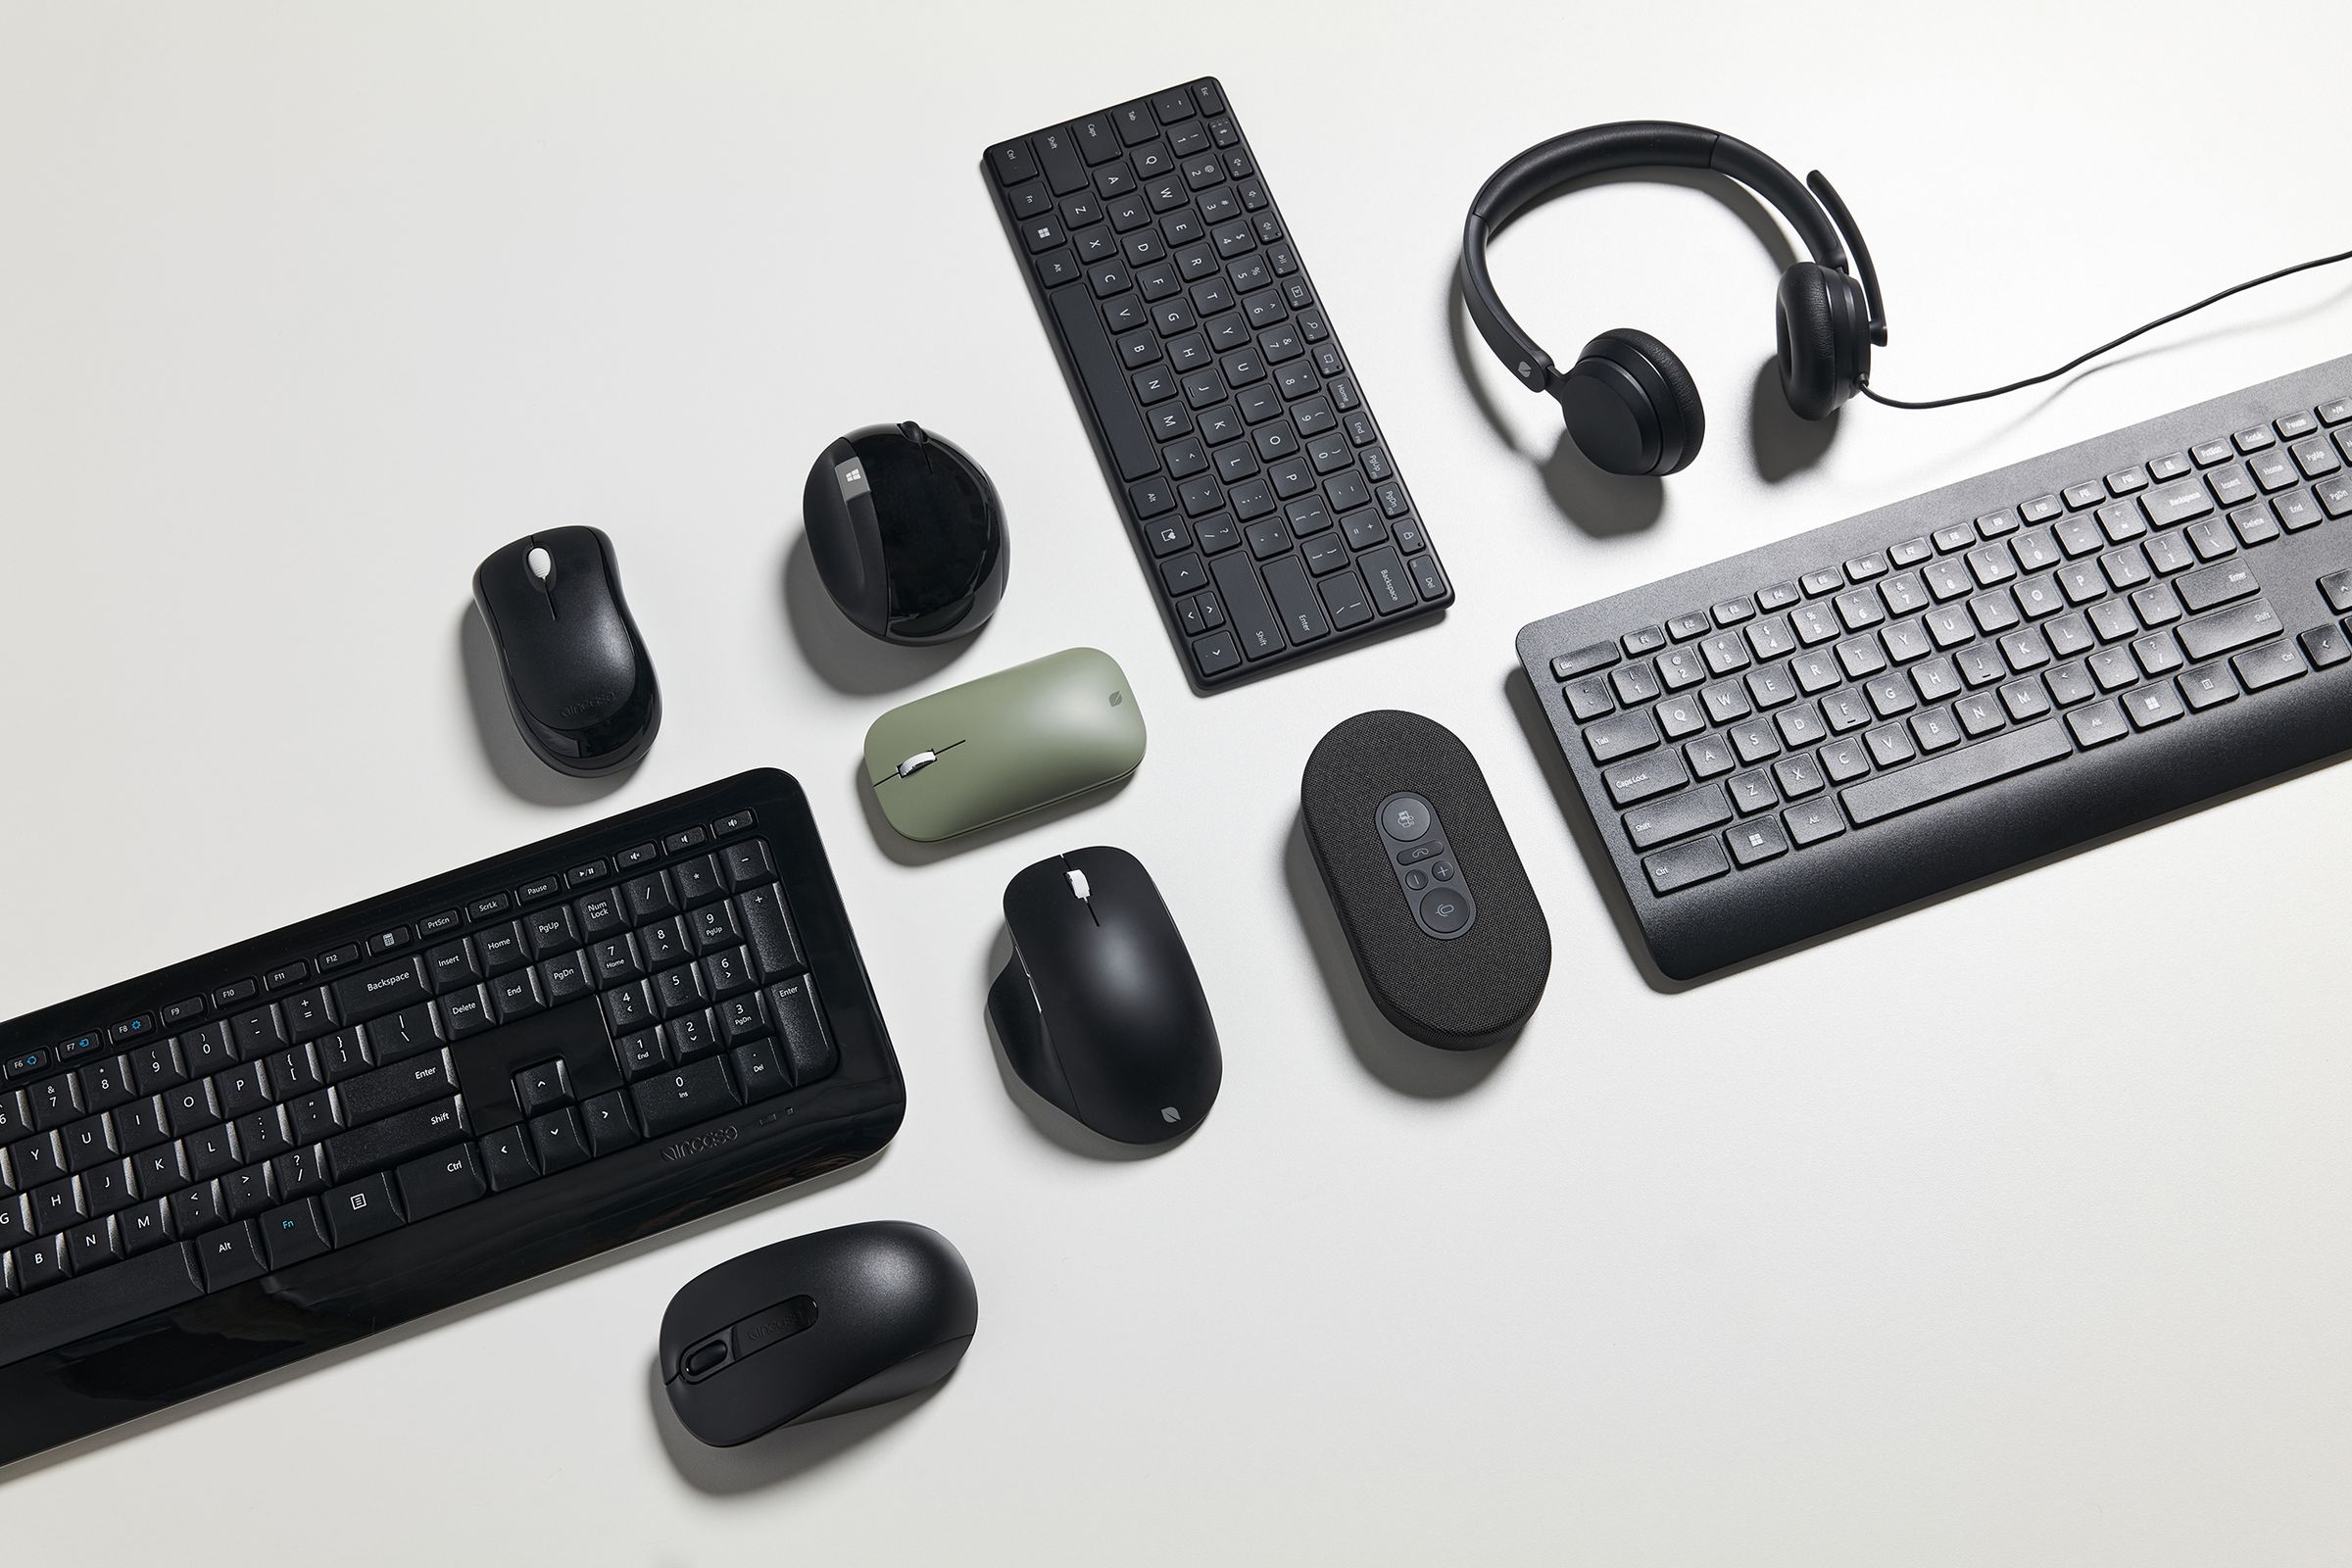 Microsoft’s PC accessories are now being branded and sold by Incase